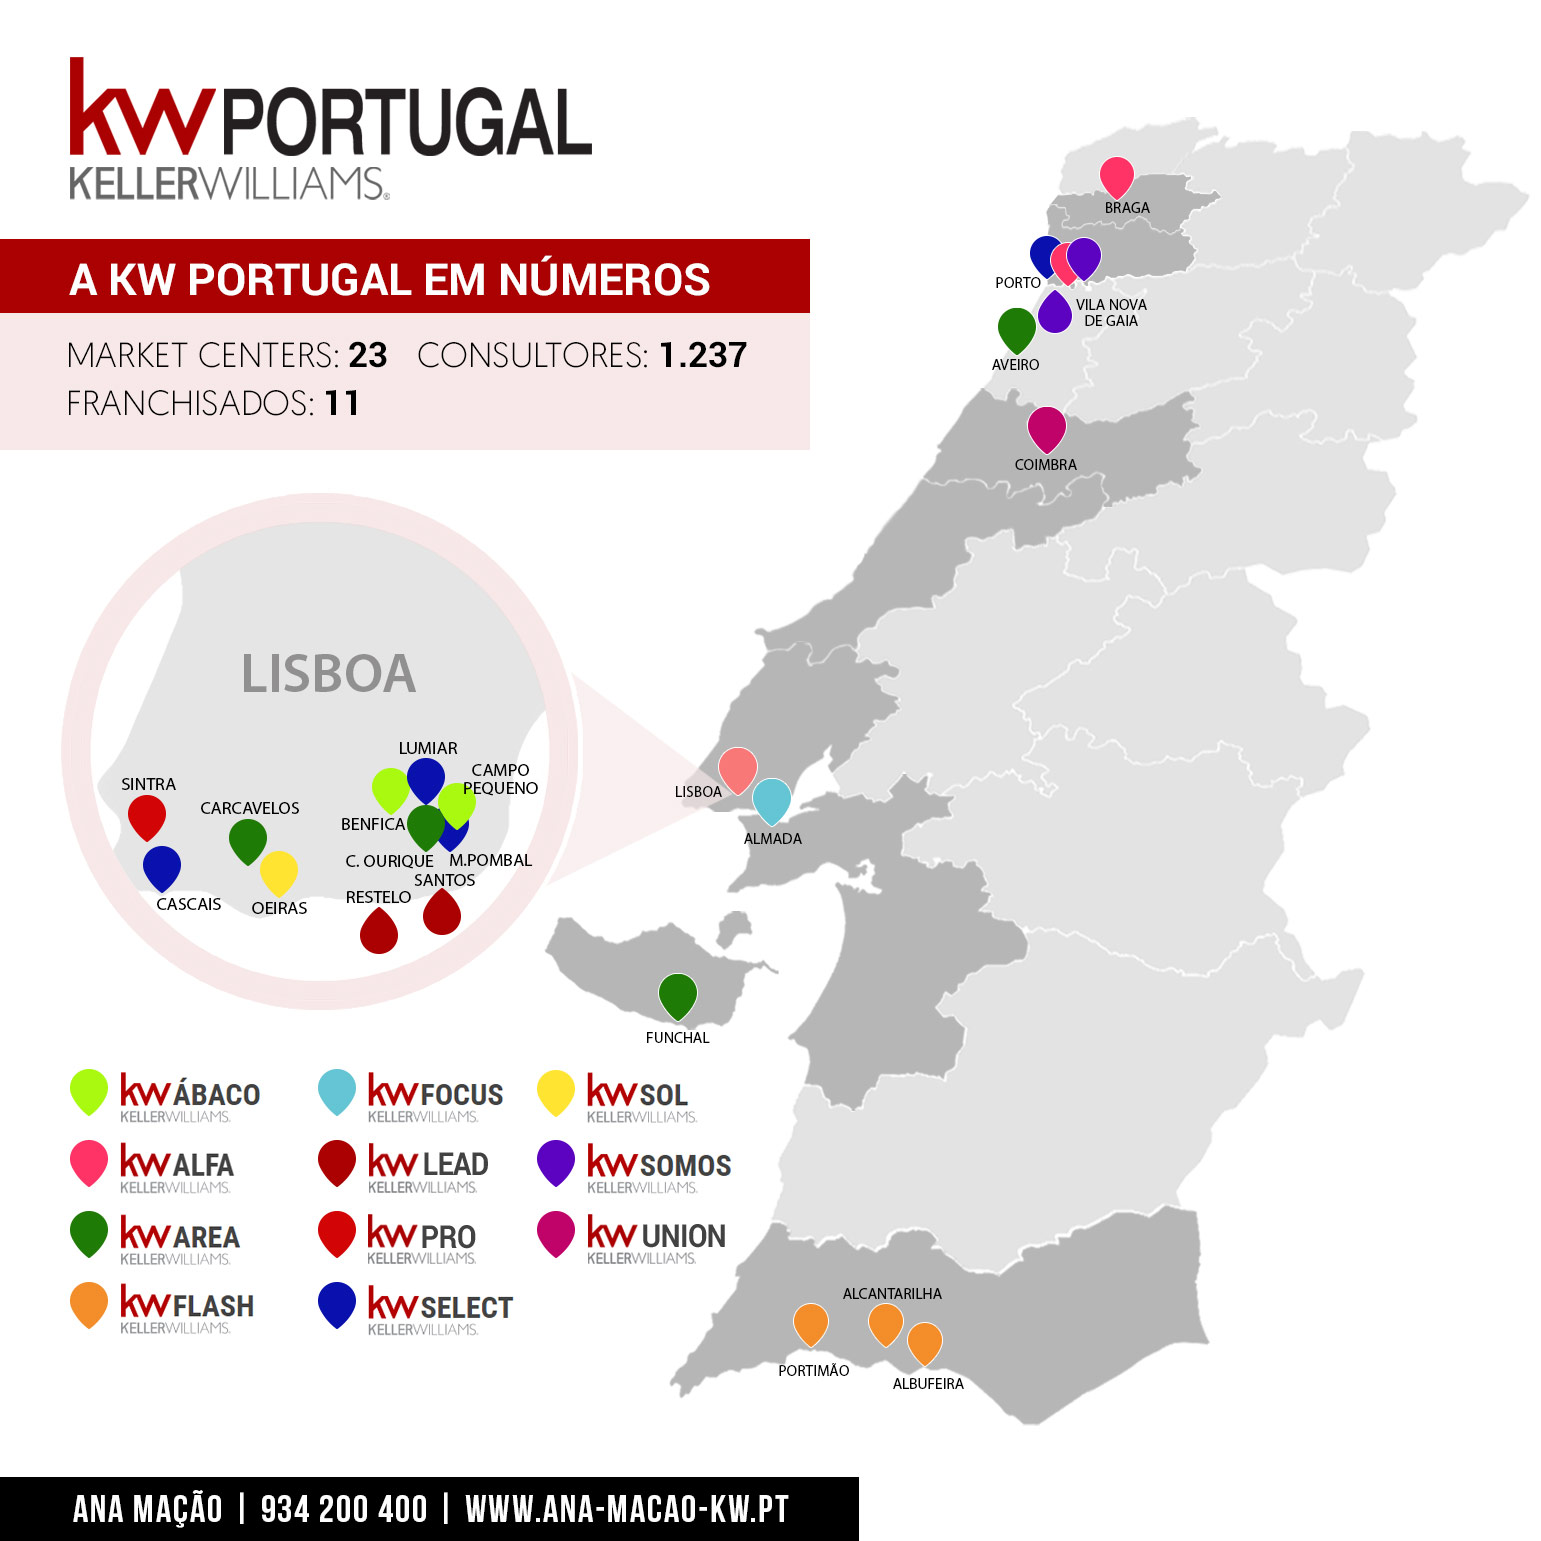 KW Portugal Franchisees and Market Centers Map - Sept. 2019